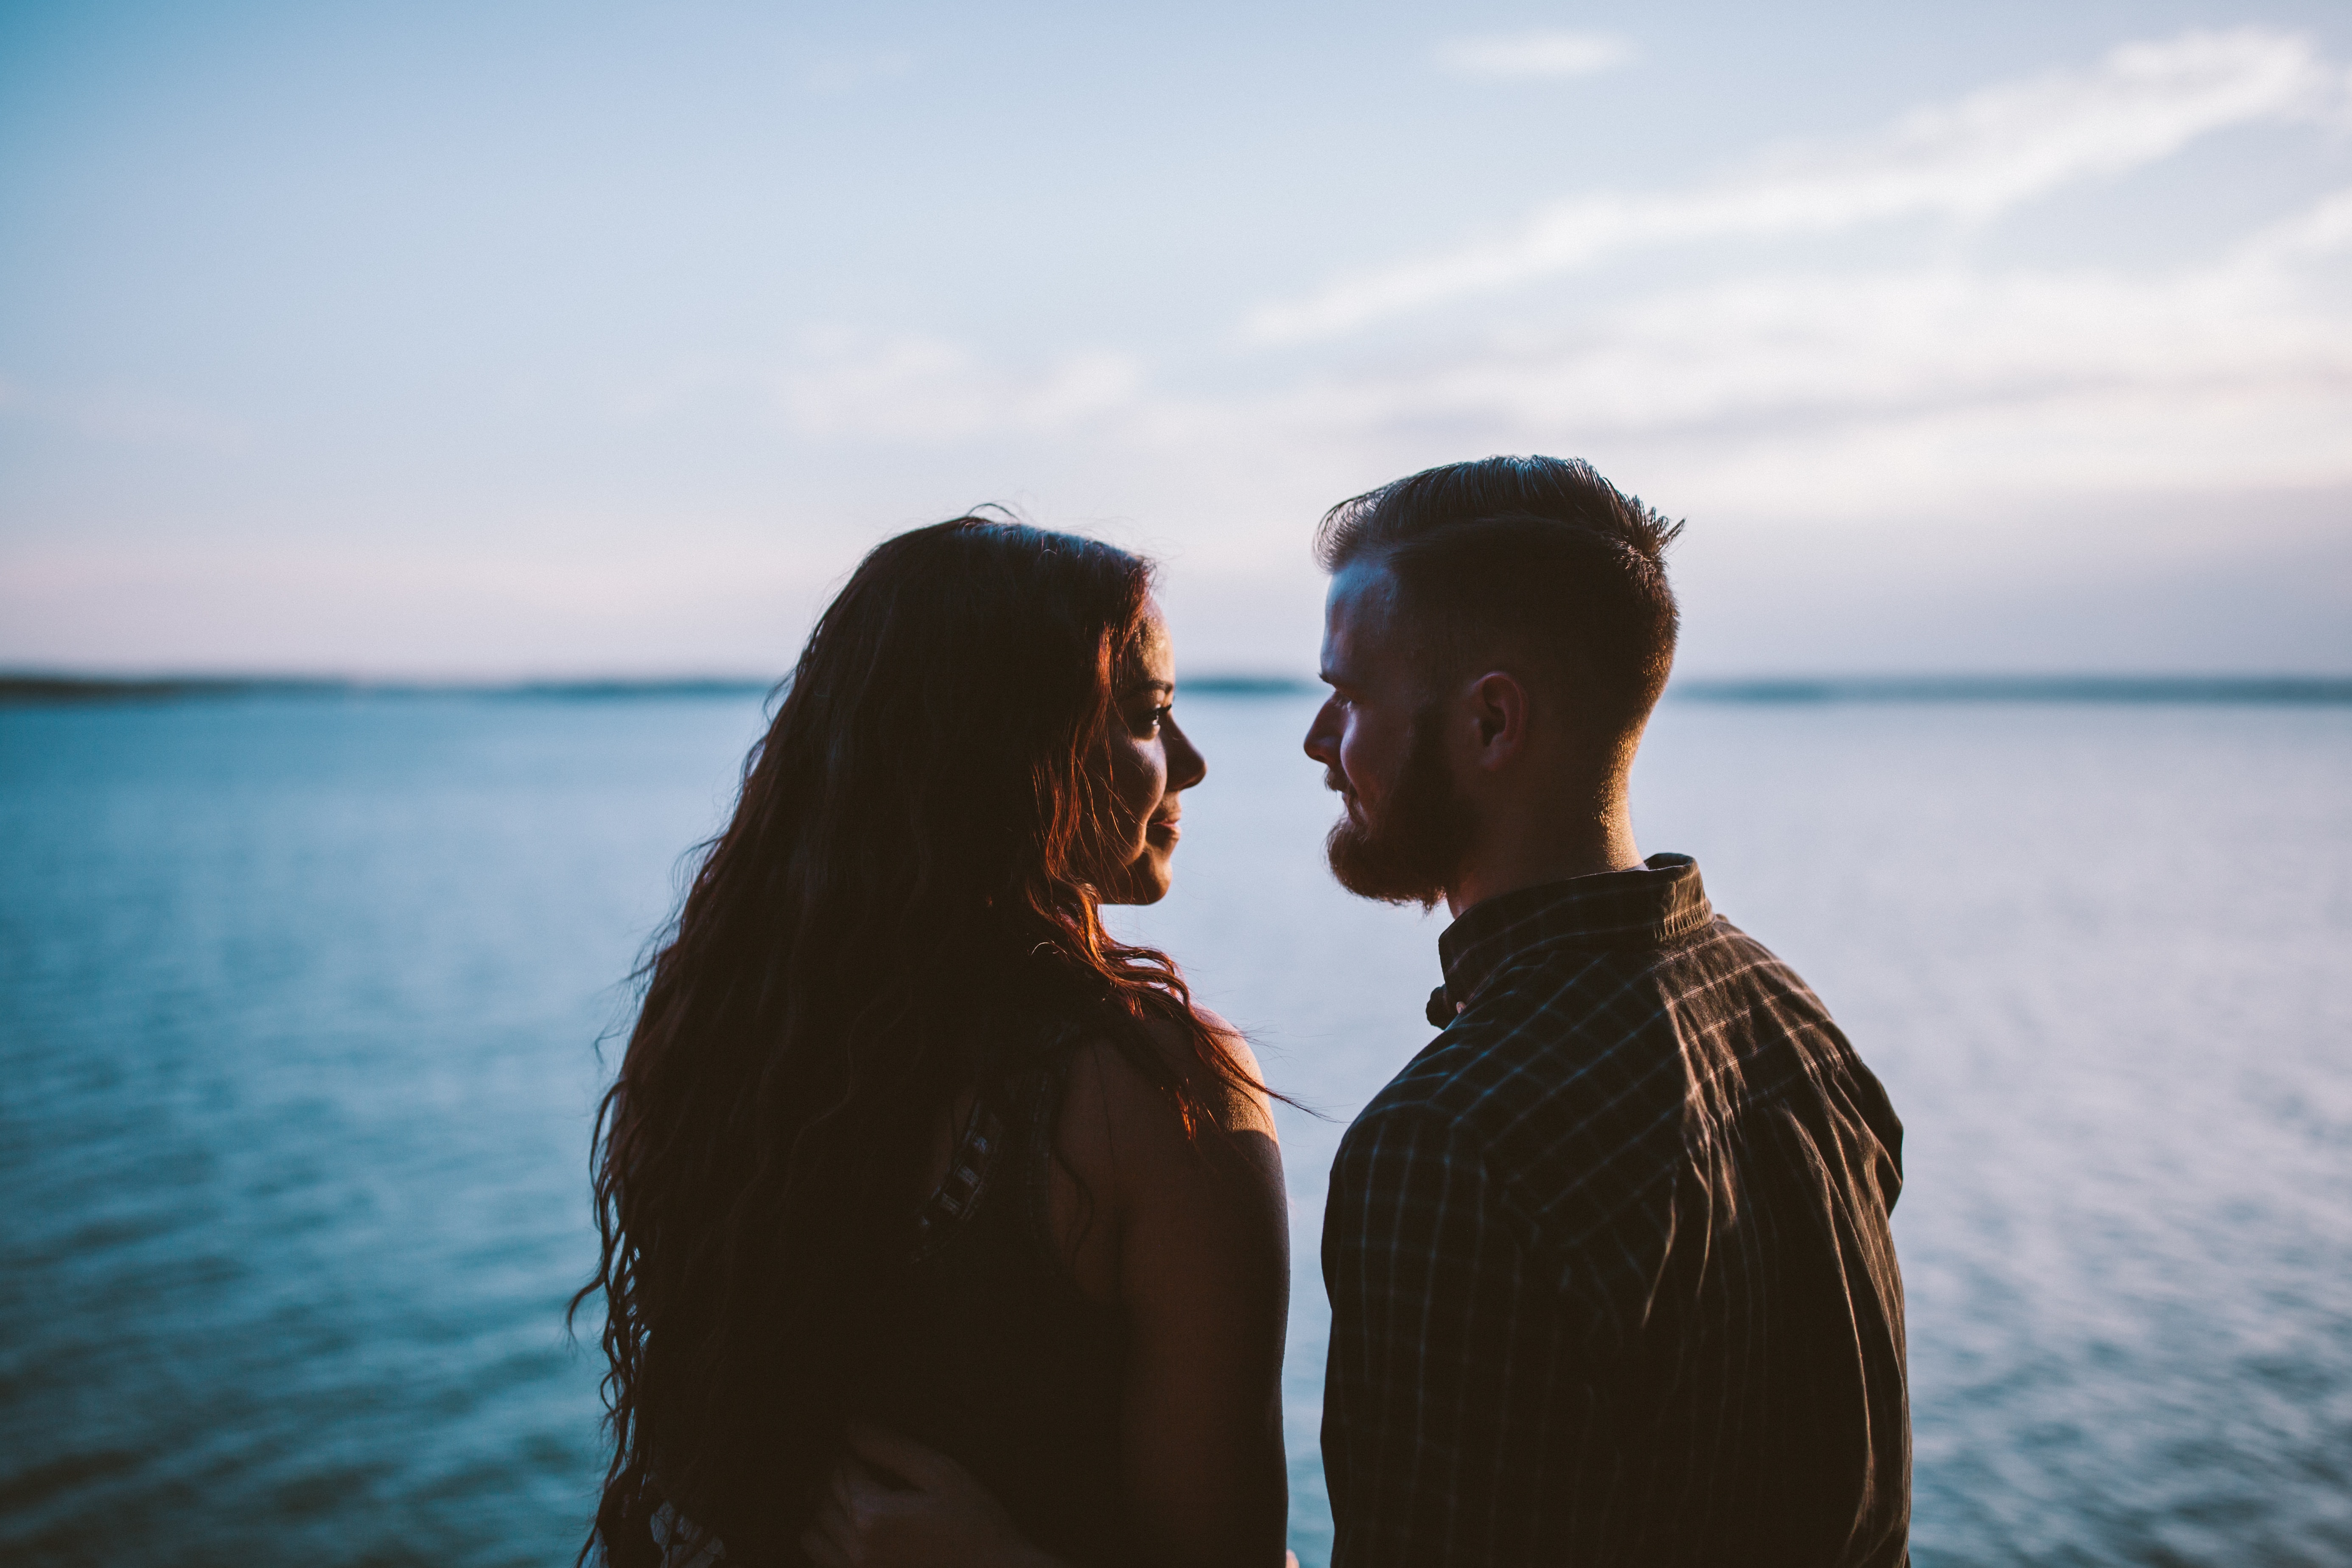 A photo of a couple gazing at each other | Source: Unsplash